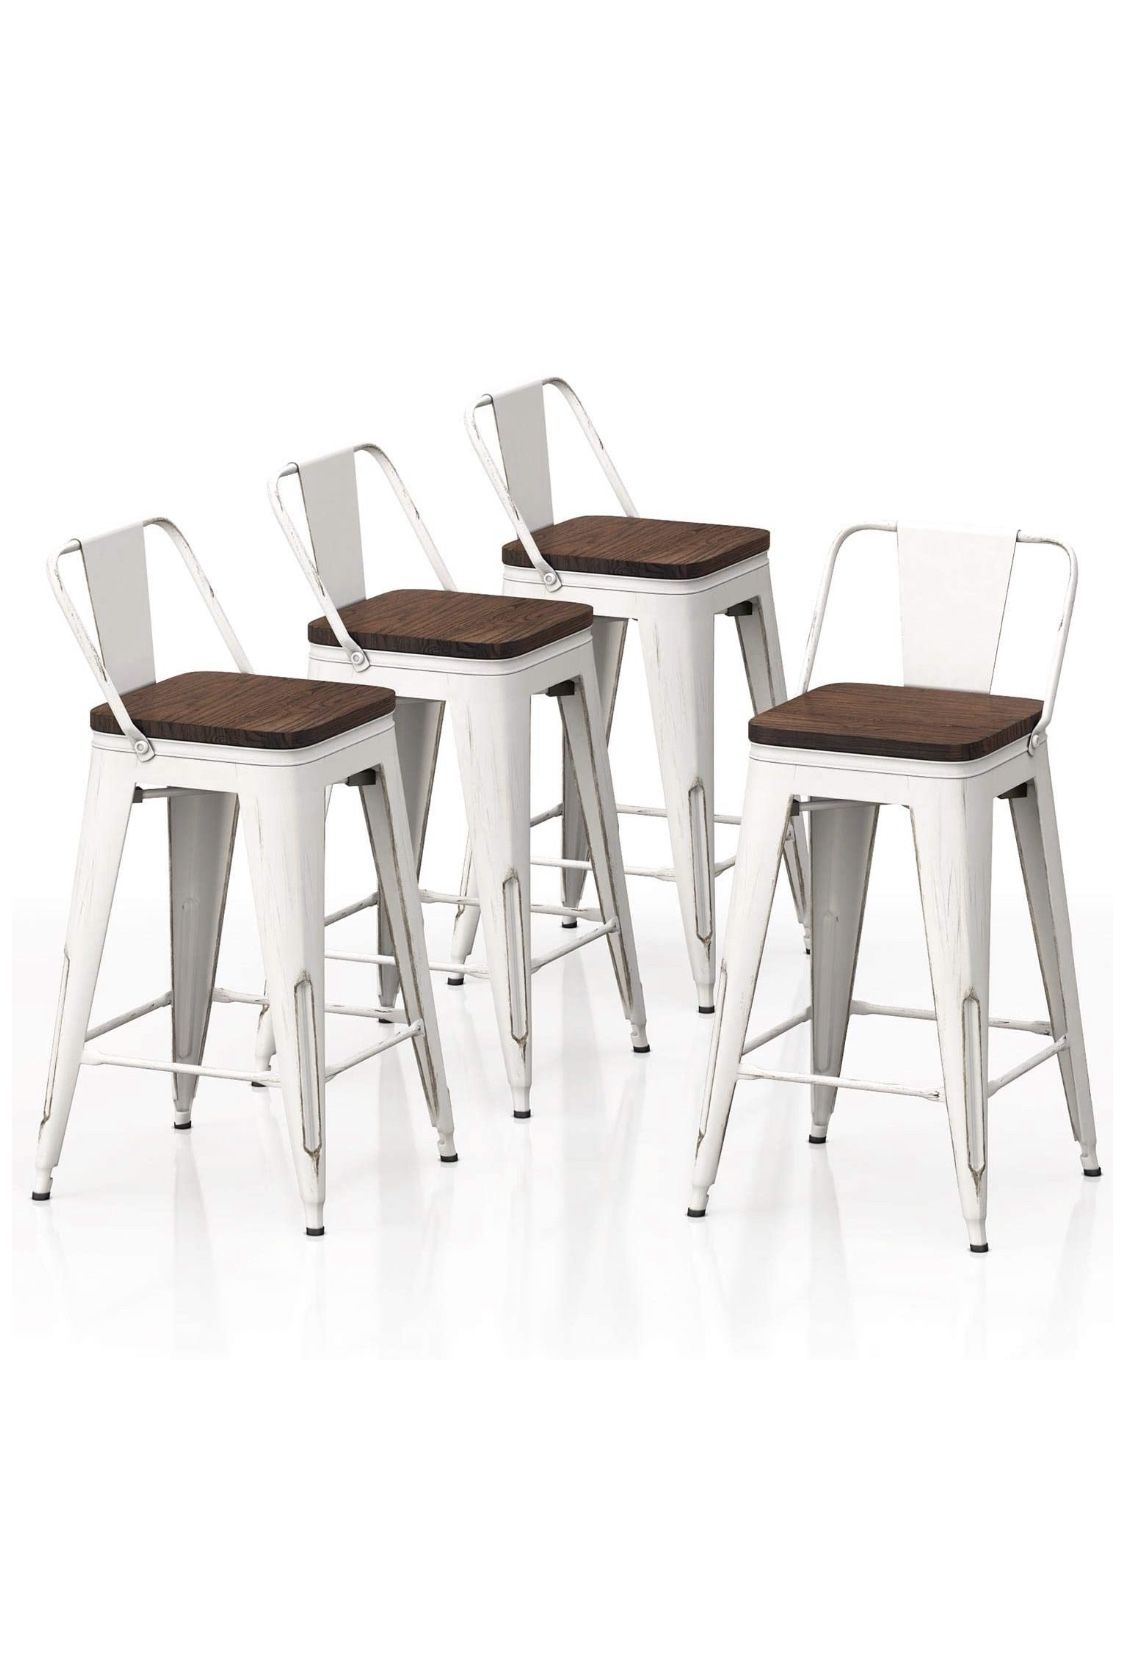 Kitchen Dining Bar Chairs Patio Bar Stool, Set of 4, Distressed White Color